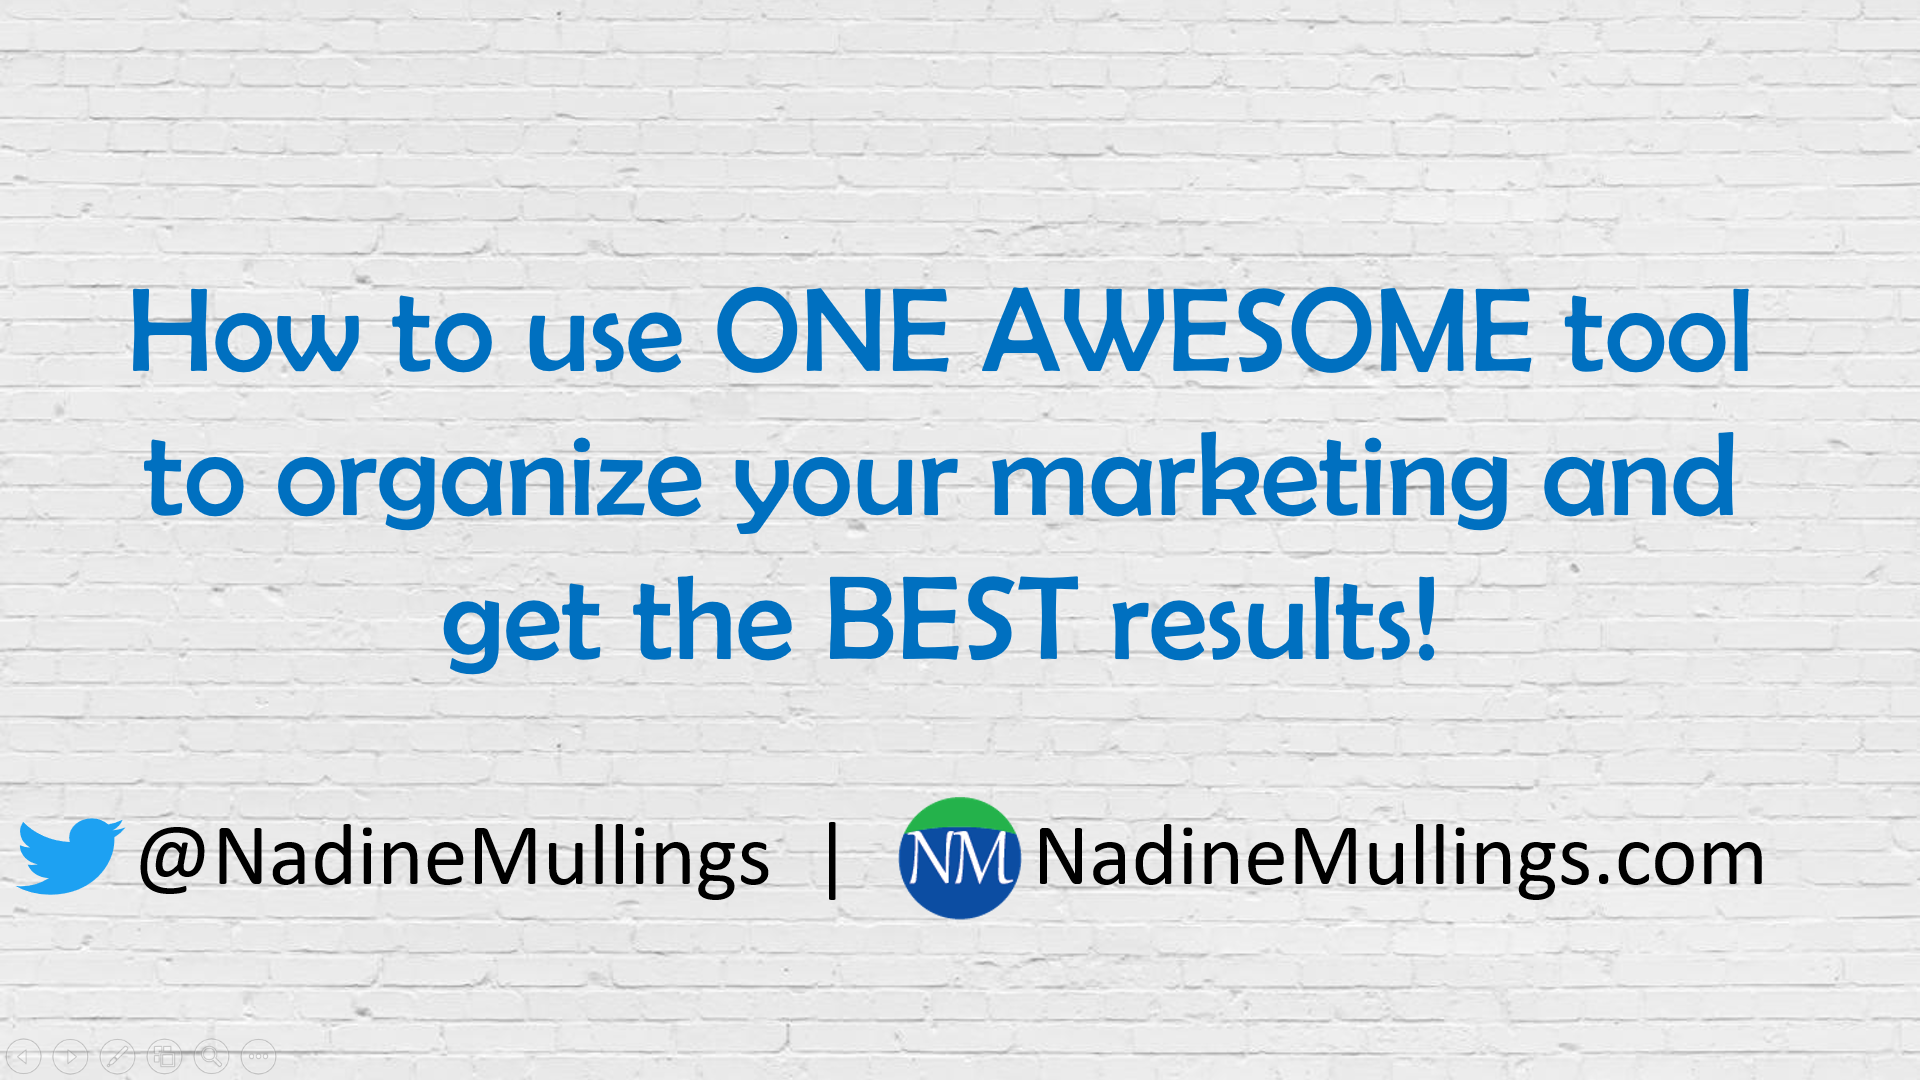 How to use ONE AWESOME tool to organize your marketing and get the BEST results!